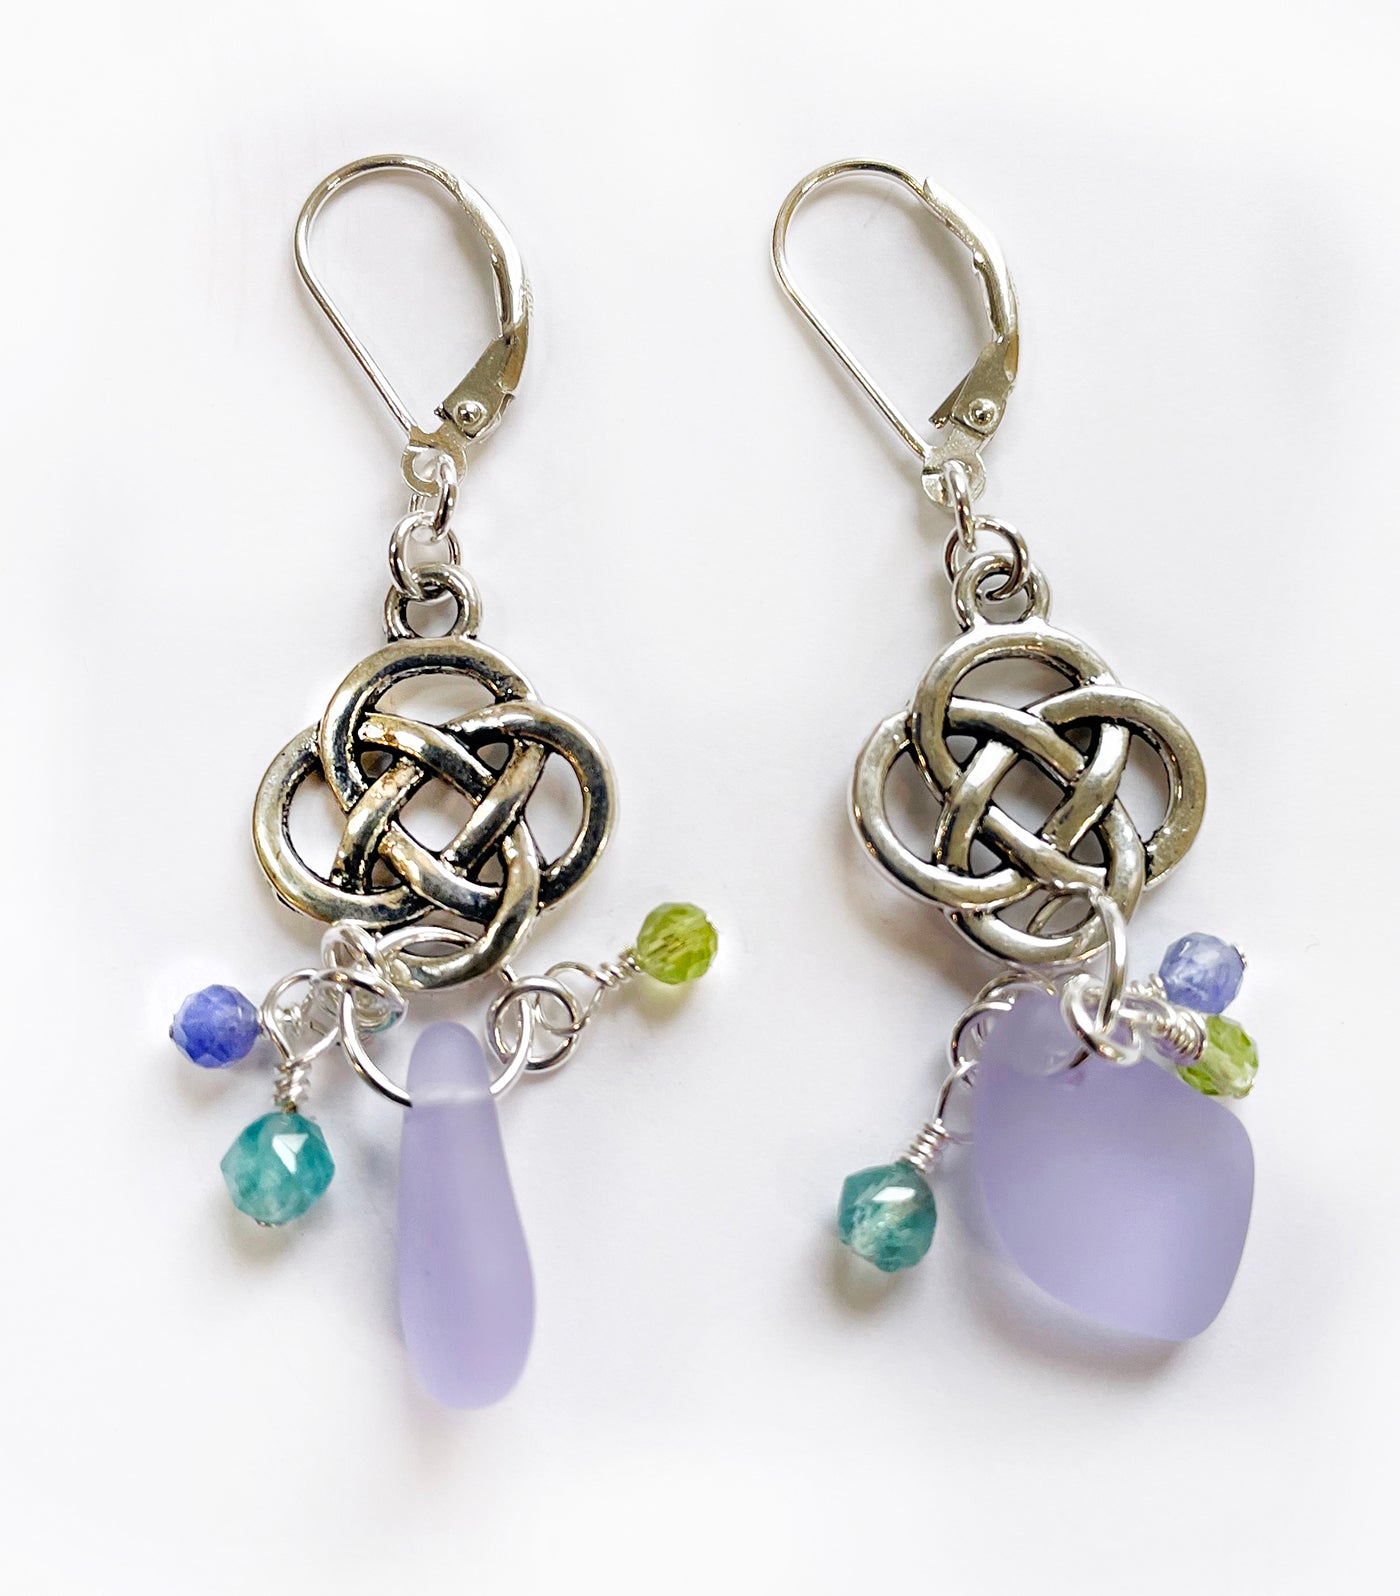 Medium Round Celtic Knot with Pebble Sea Glass Earrings